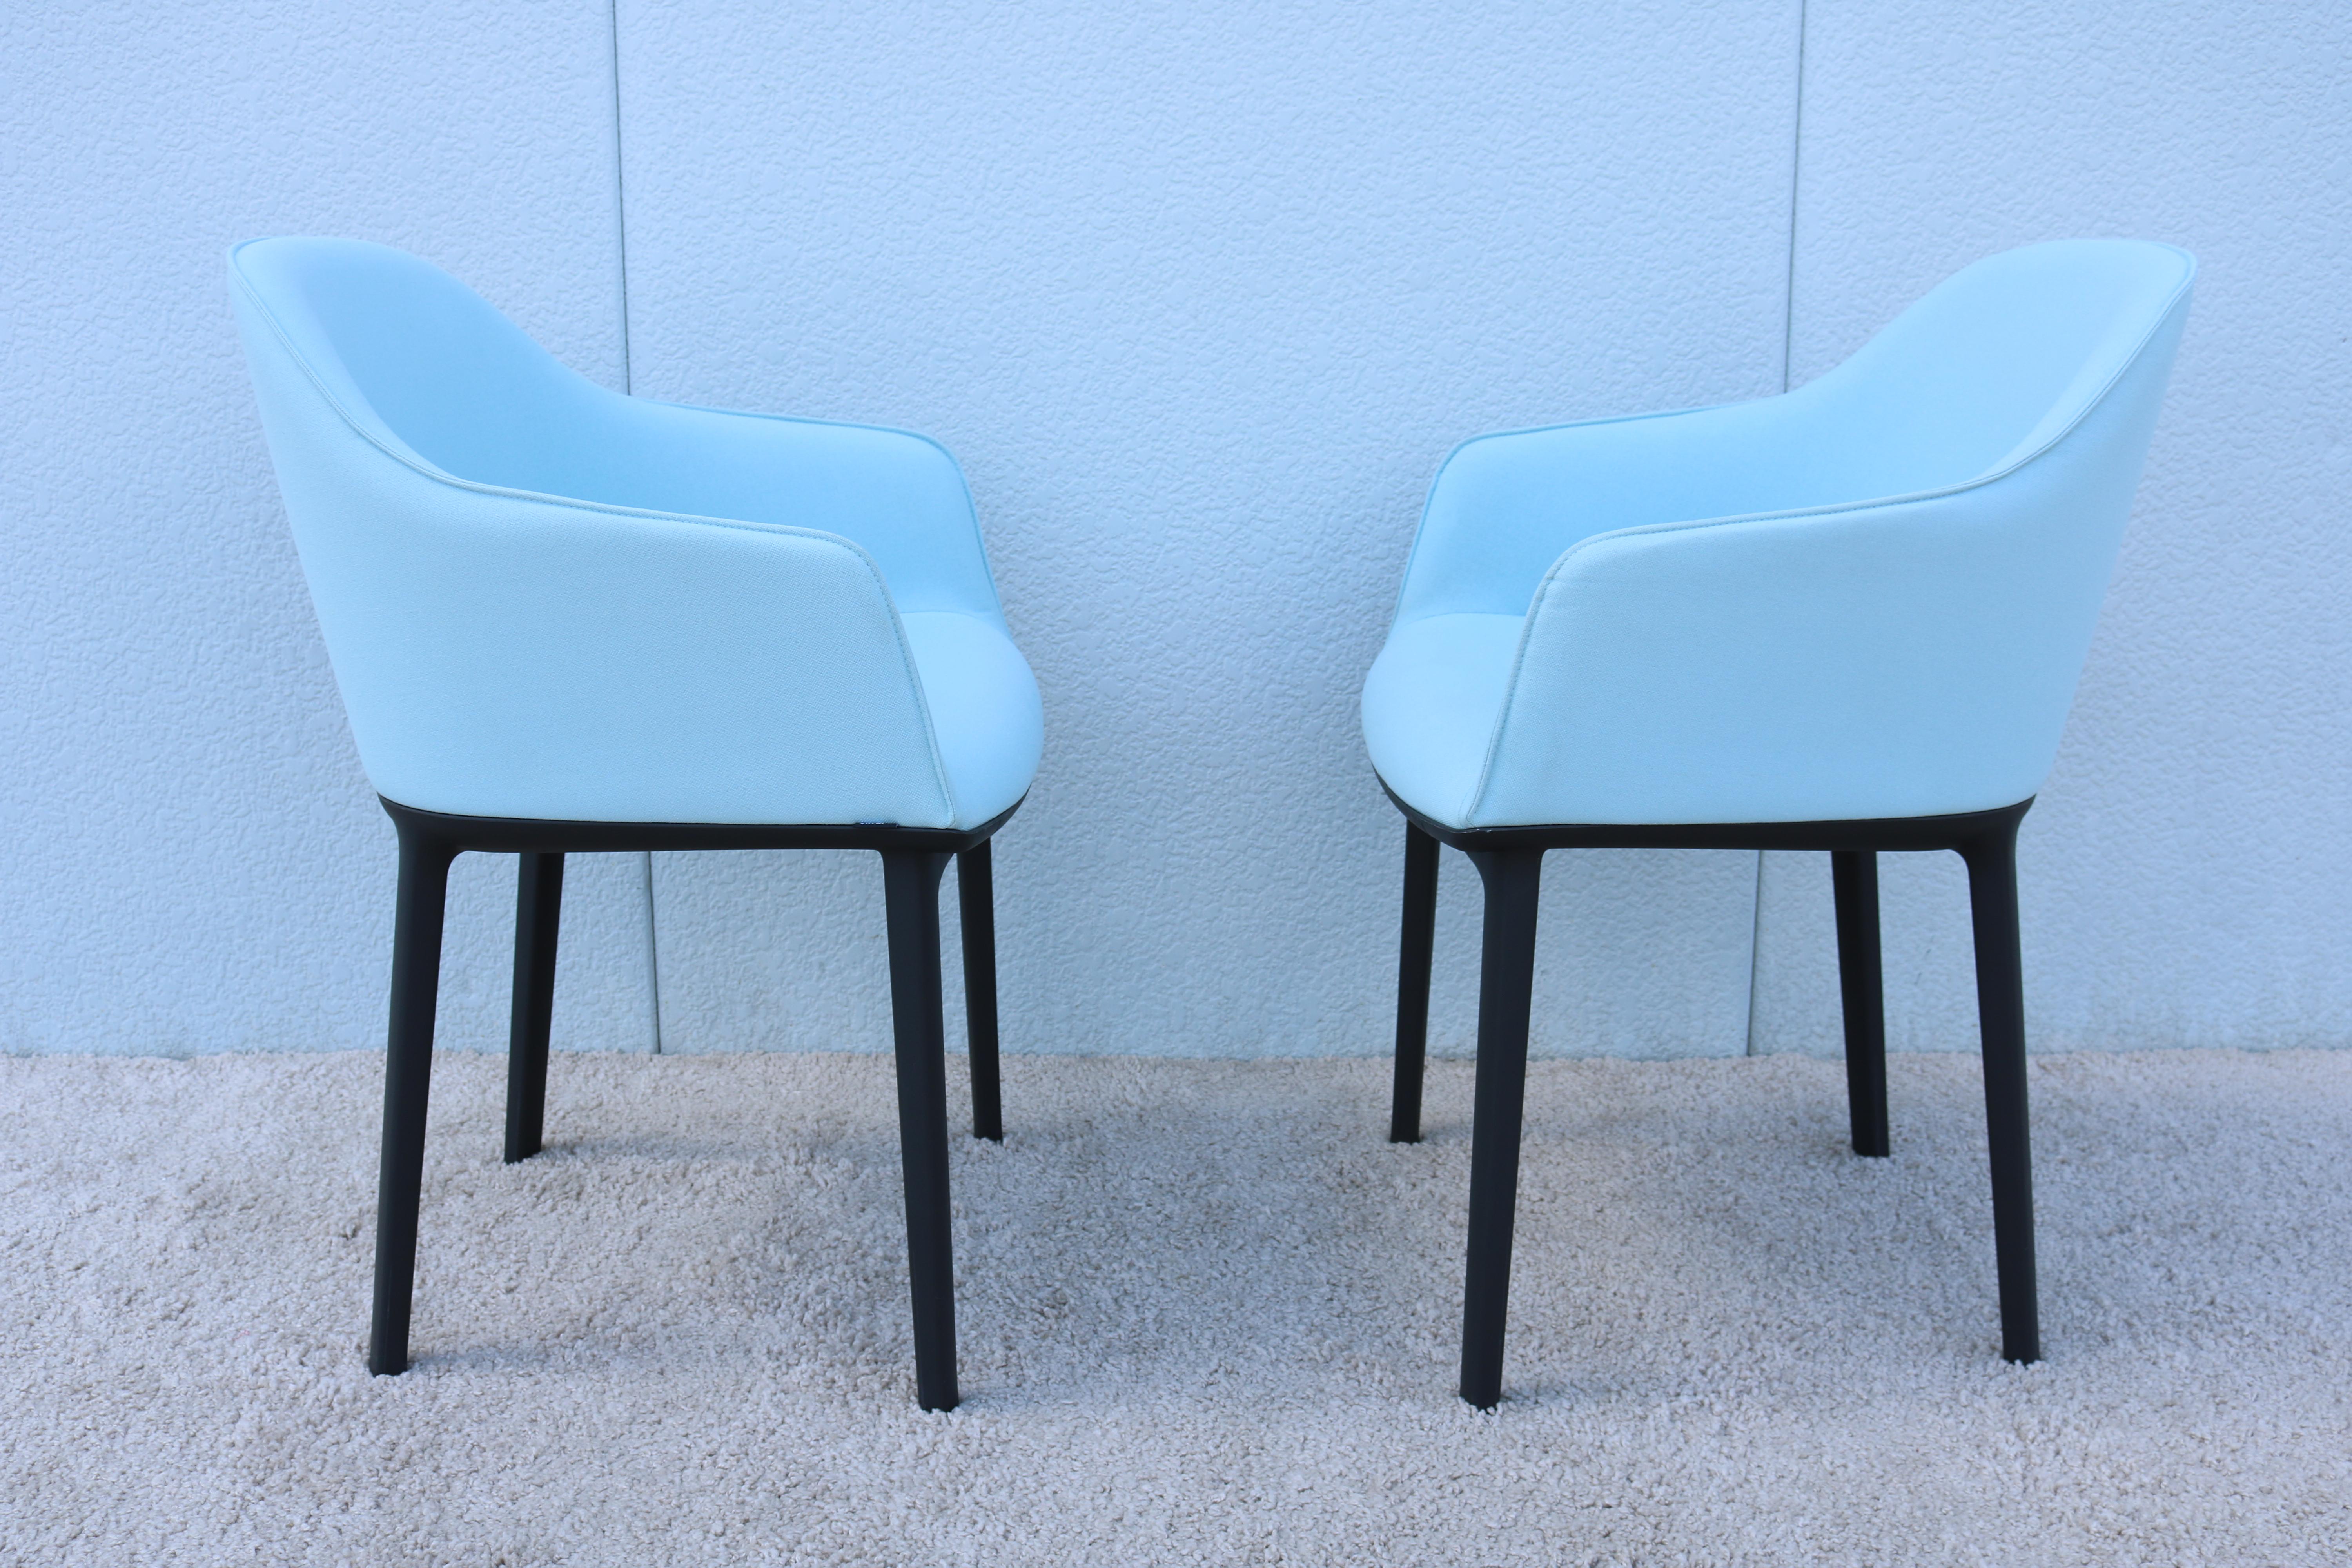 Modern Ronan and Erwan Bouroullec for Vitra Ice Blue Softshell Chairs, a Pair For Sale 6